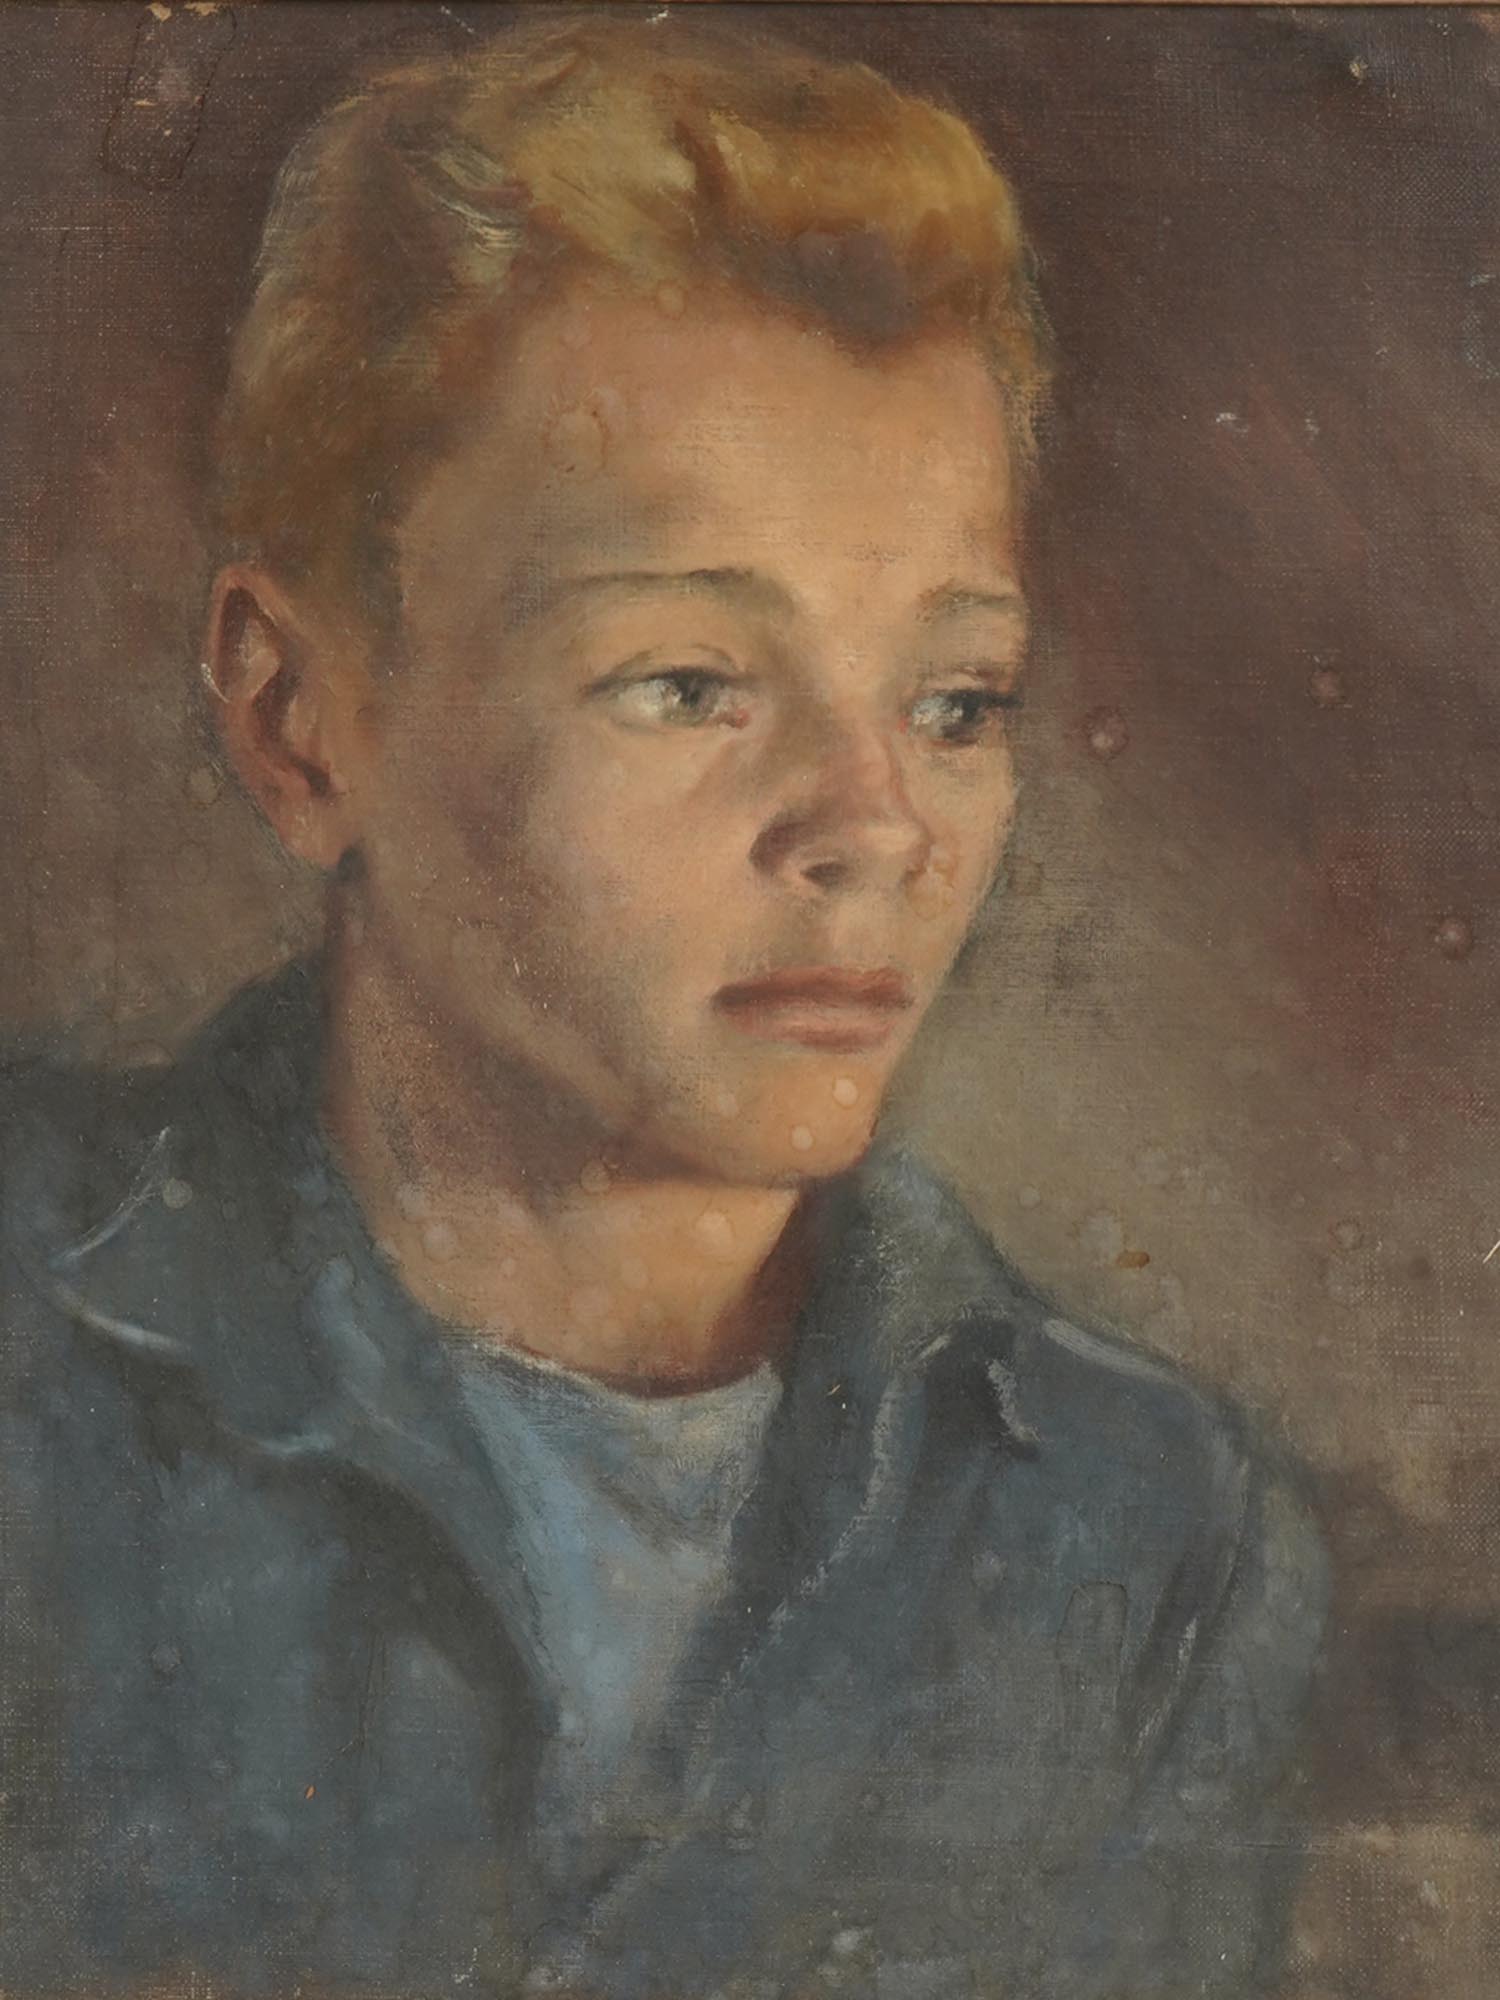 MID CENTURY AMERICAN PORTRAIT PAINTING OF A BOY PIC-1